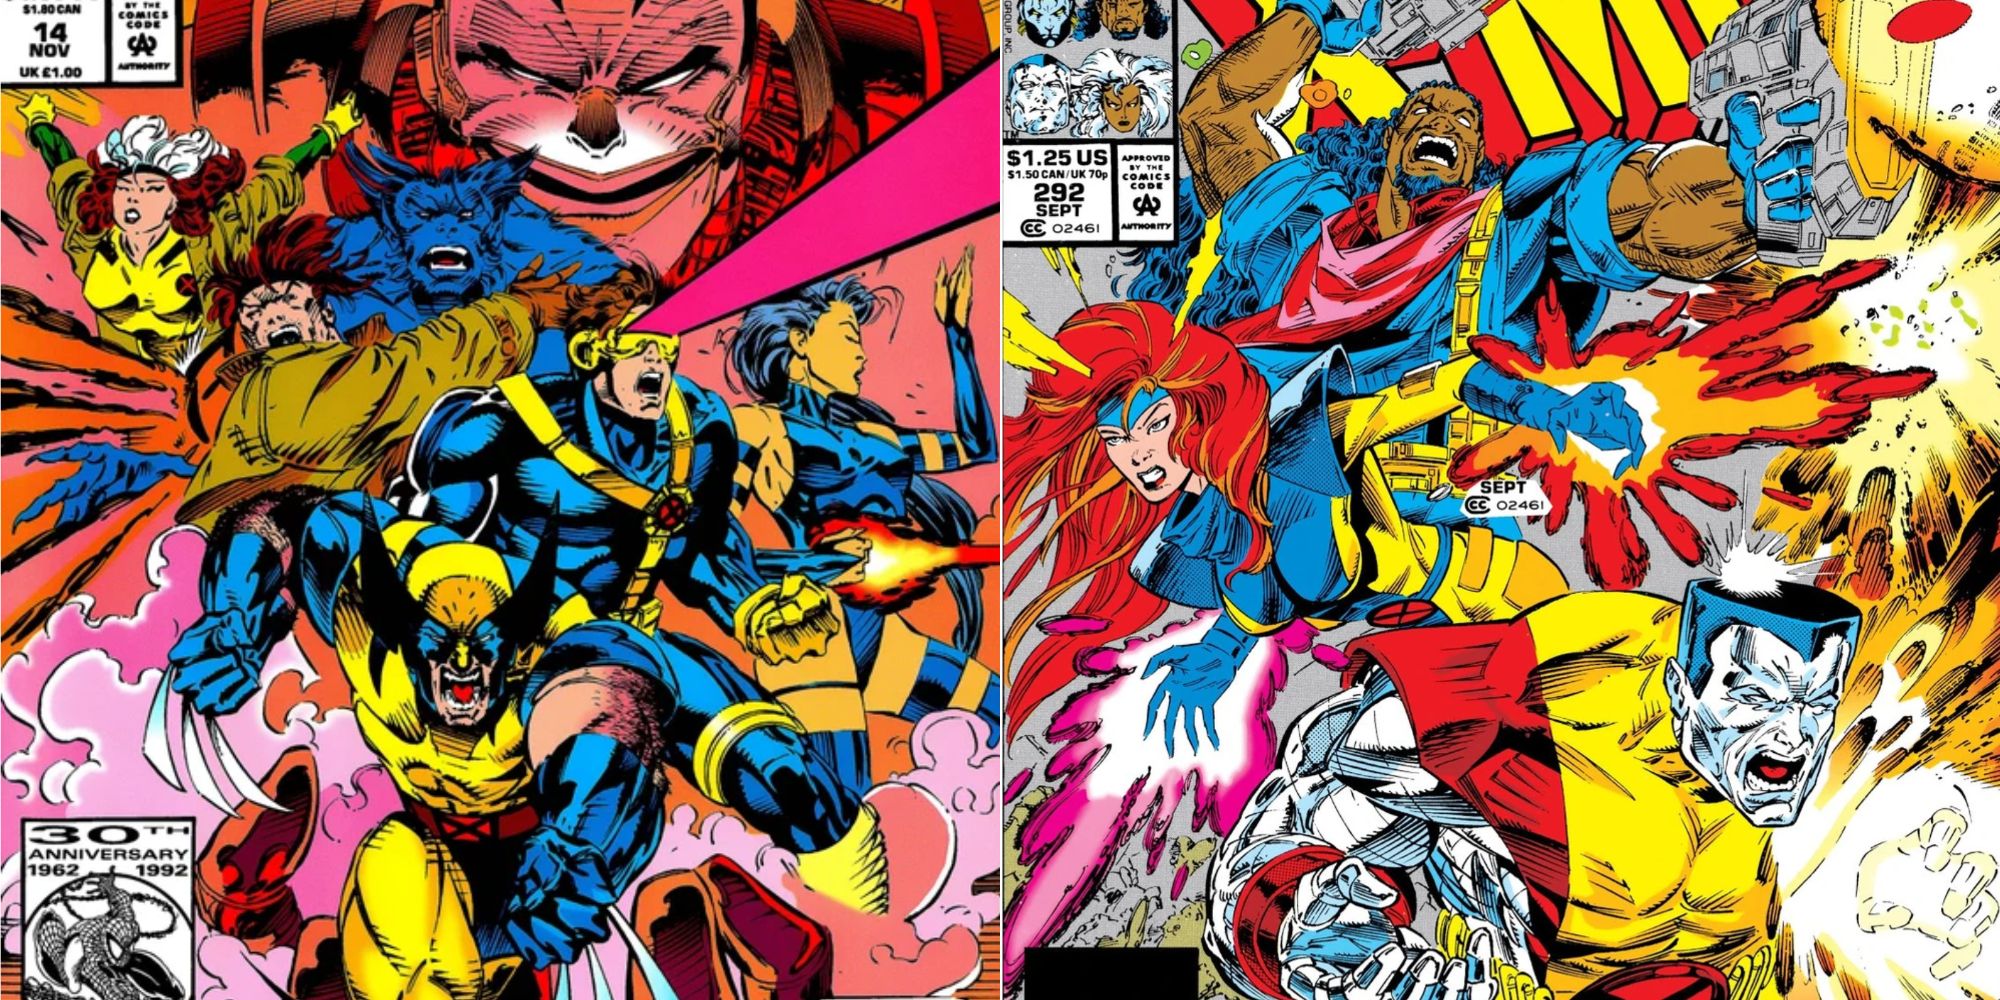 The covers to X-Men 14 and Uncanny X-Men 292, respectively featuring Rogue, Gambit, Beast, Wolverine, Cyclops, and Psylocke using their powers and Bishop, Jean Grey, and Colossus using their power